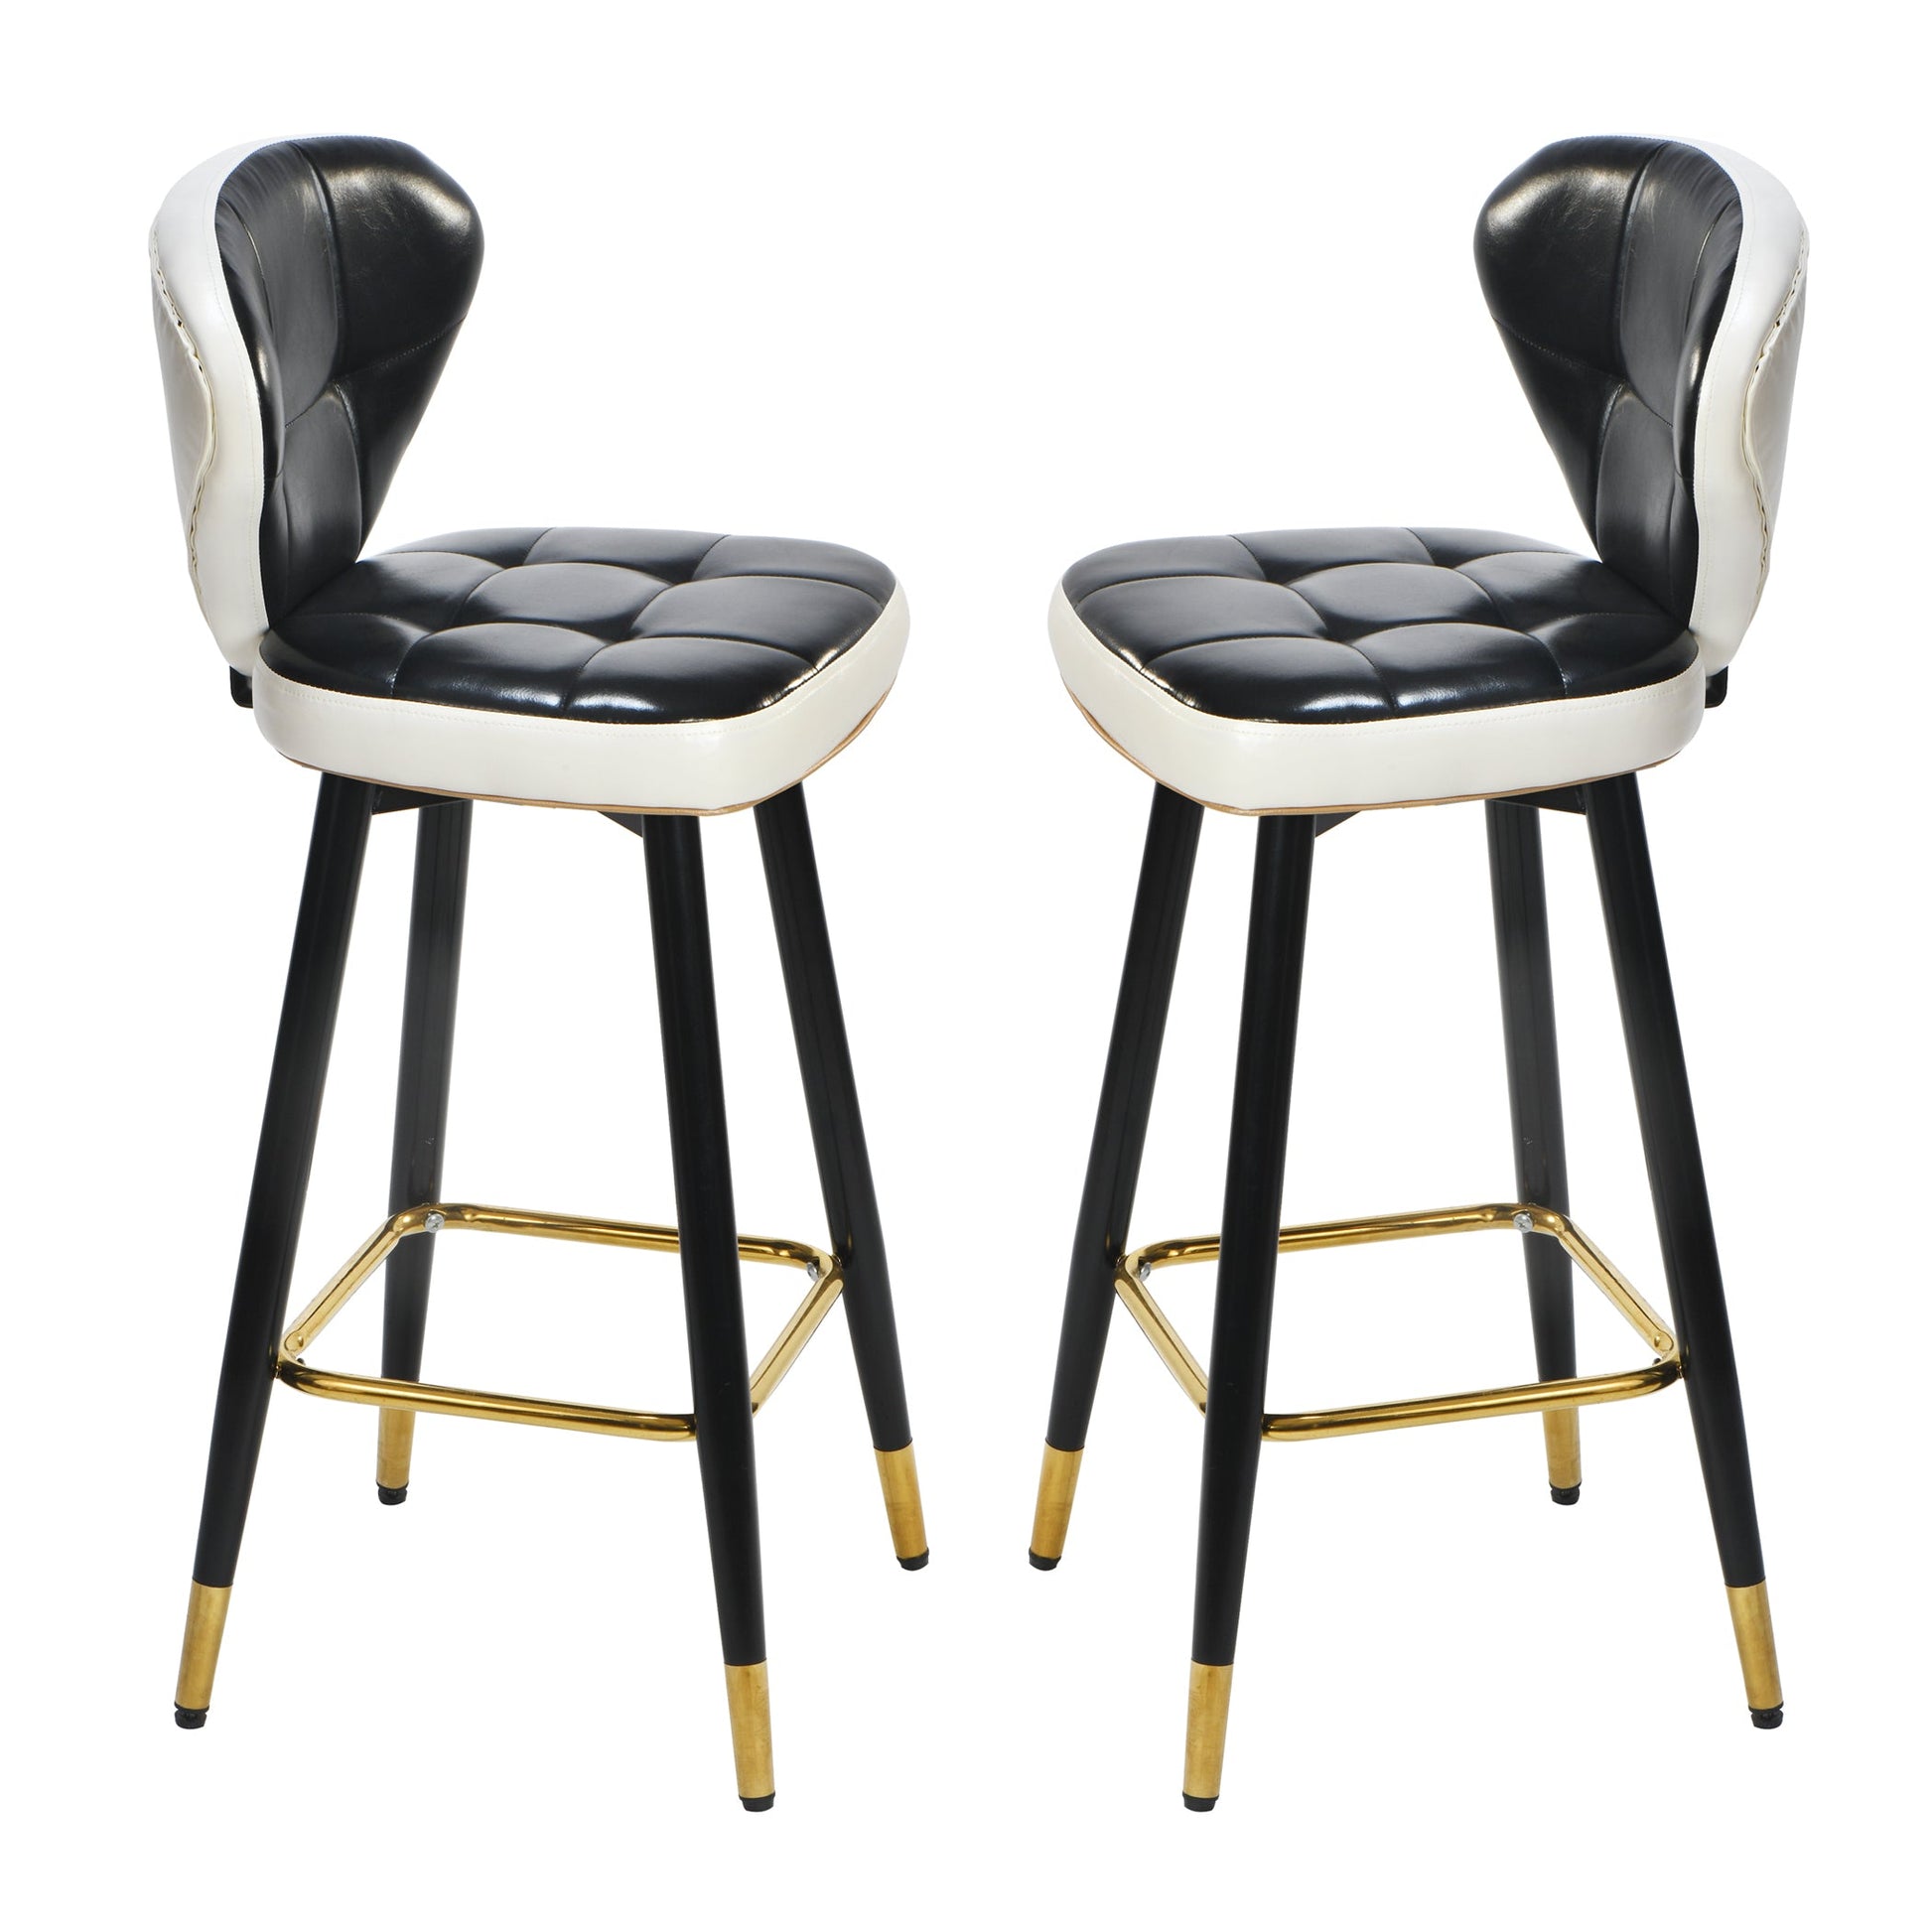 Leather Bar Stool 360 Rotating Bar Stool with Backrest and Foot Pedals for Bars, Kitchen, Dining Room,  Bar Stool Set of 2